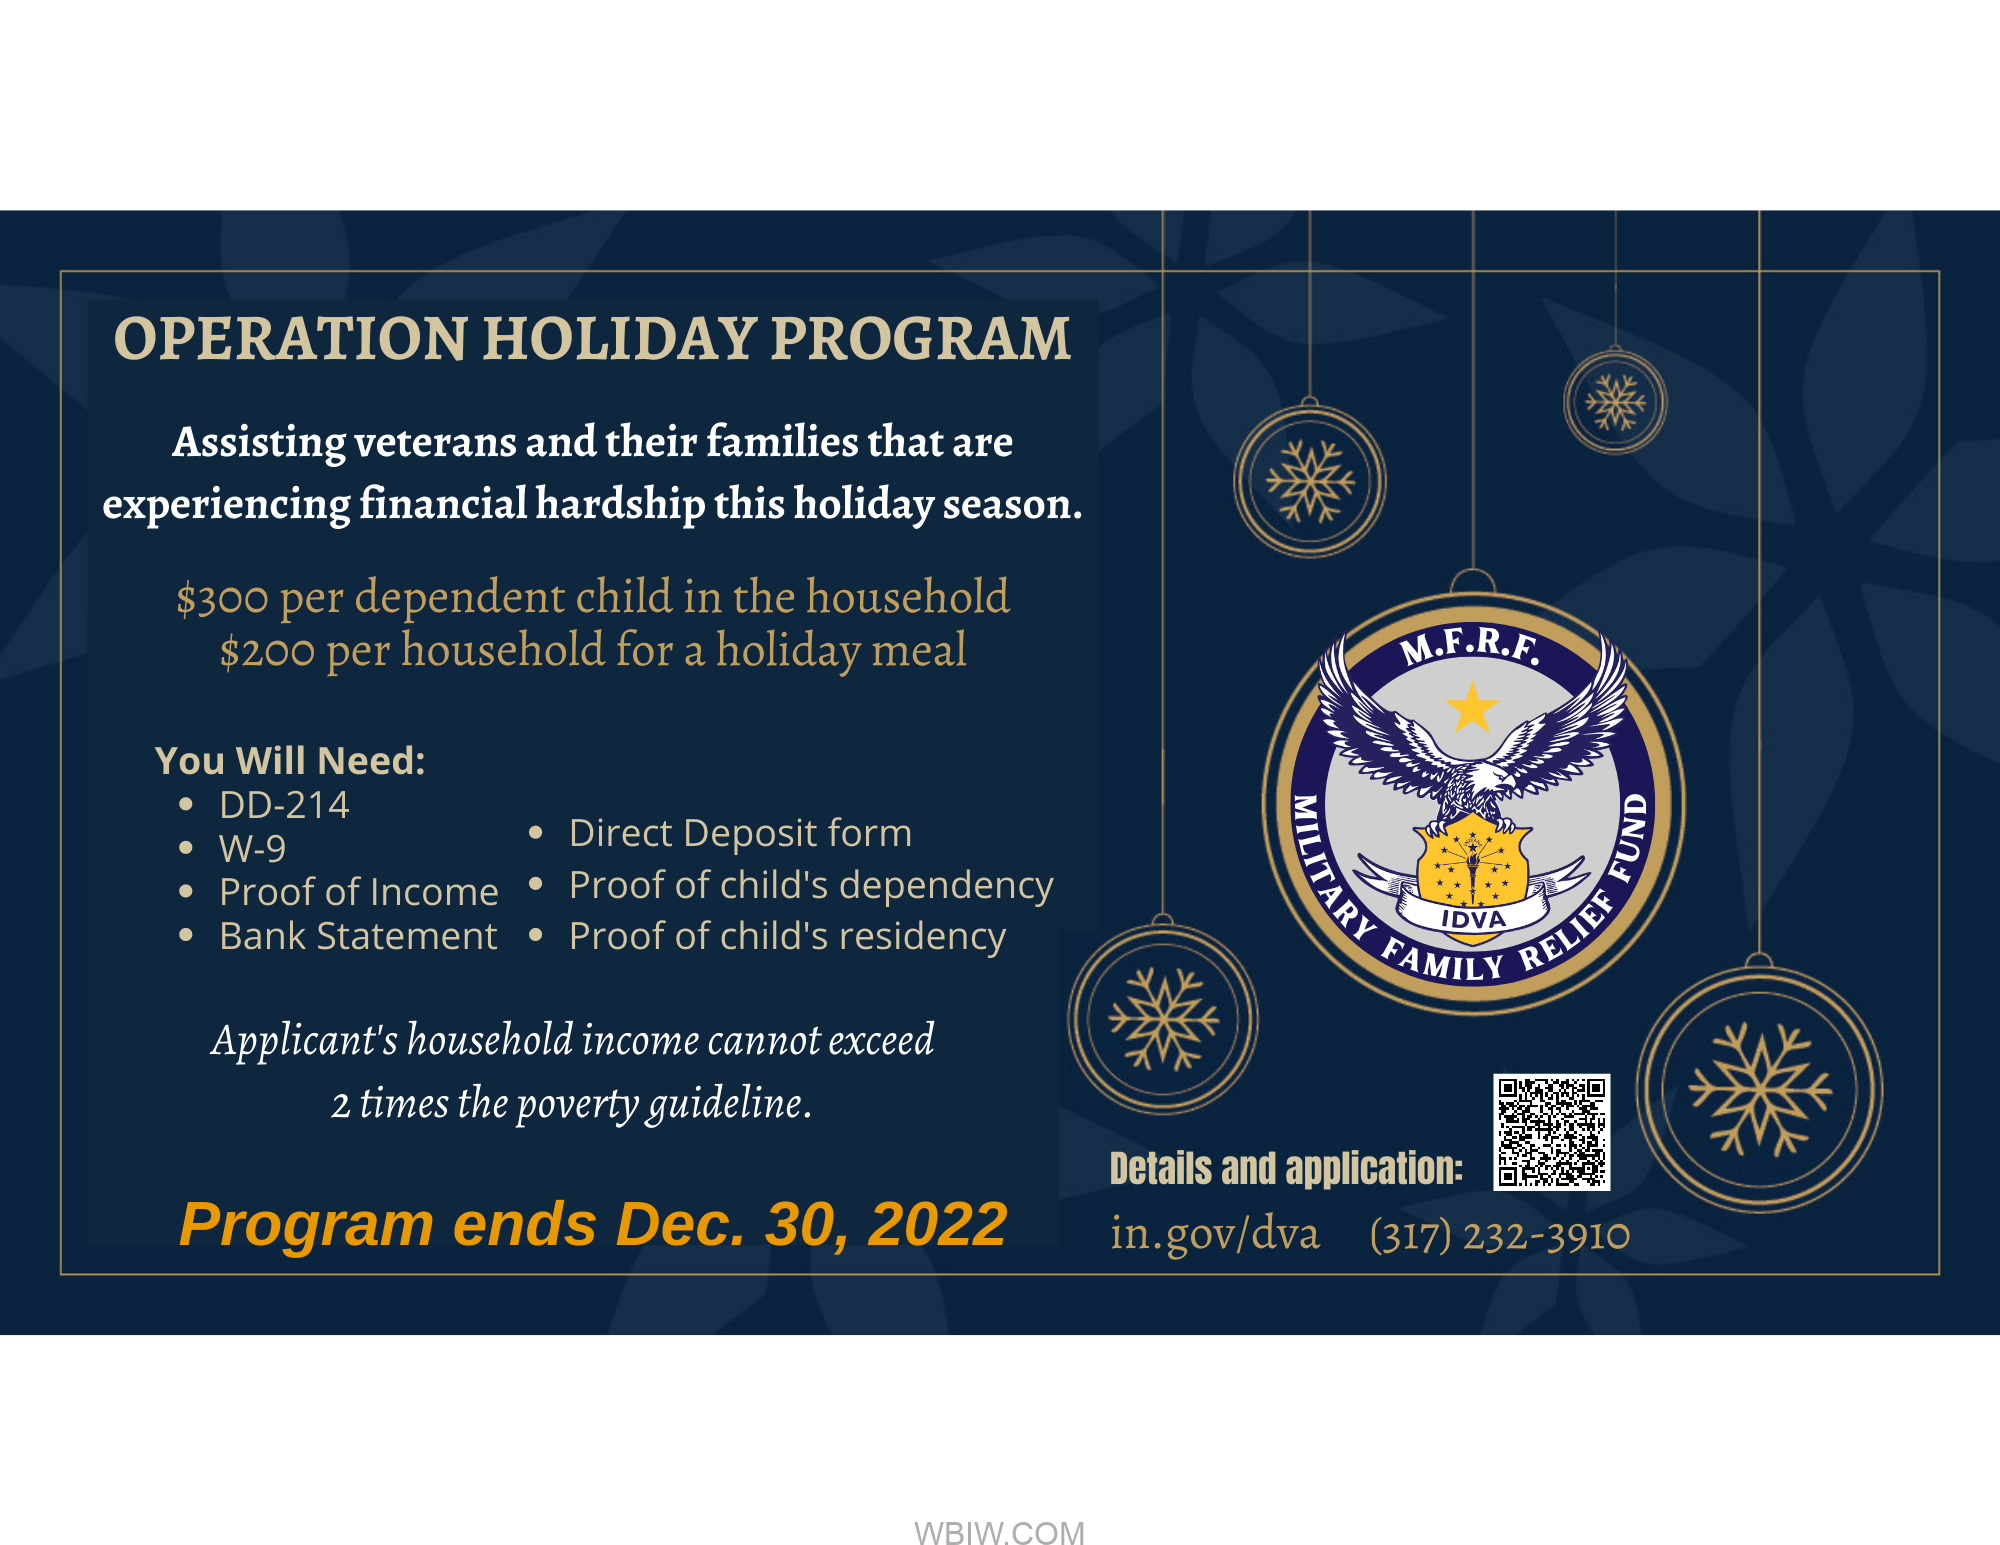 Operation Holiday Program provides veteran families with assistance WBIW